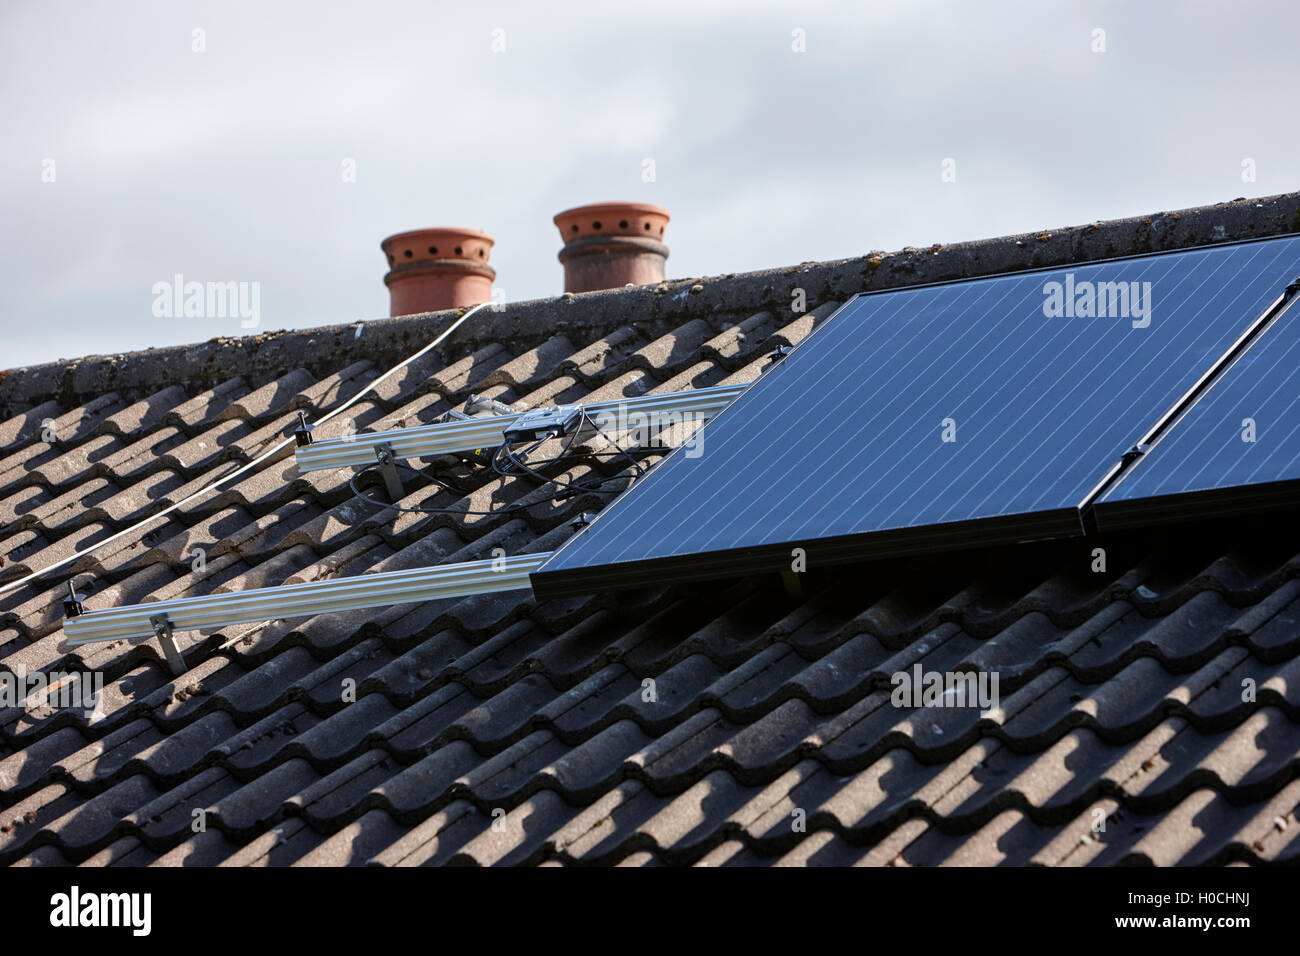 panels mounting rails and micro inverters in a domestic solar panel installation in the uk Stock Photo